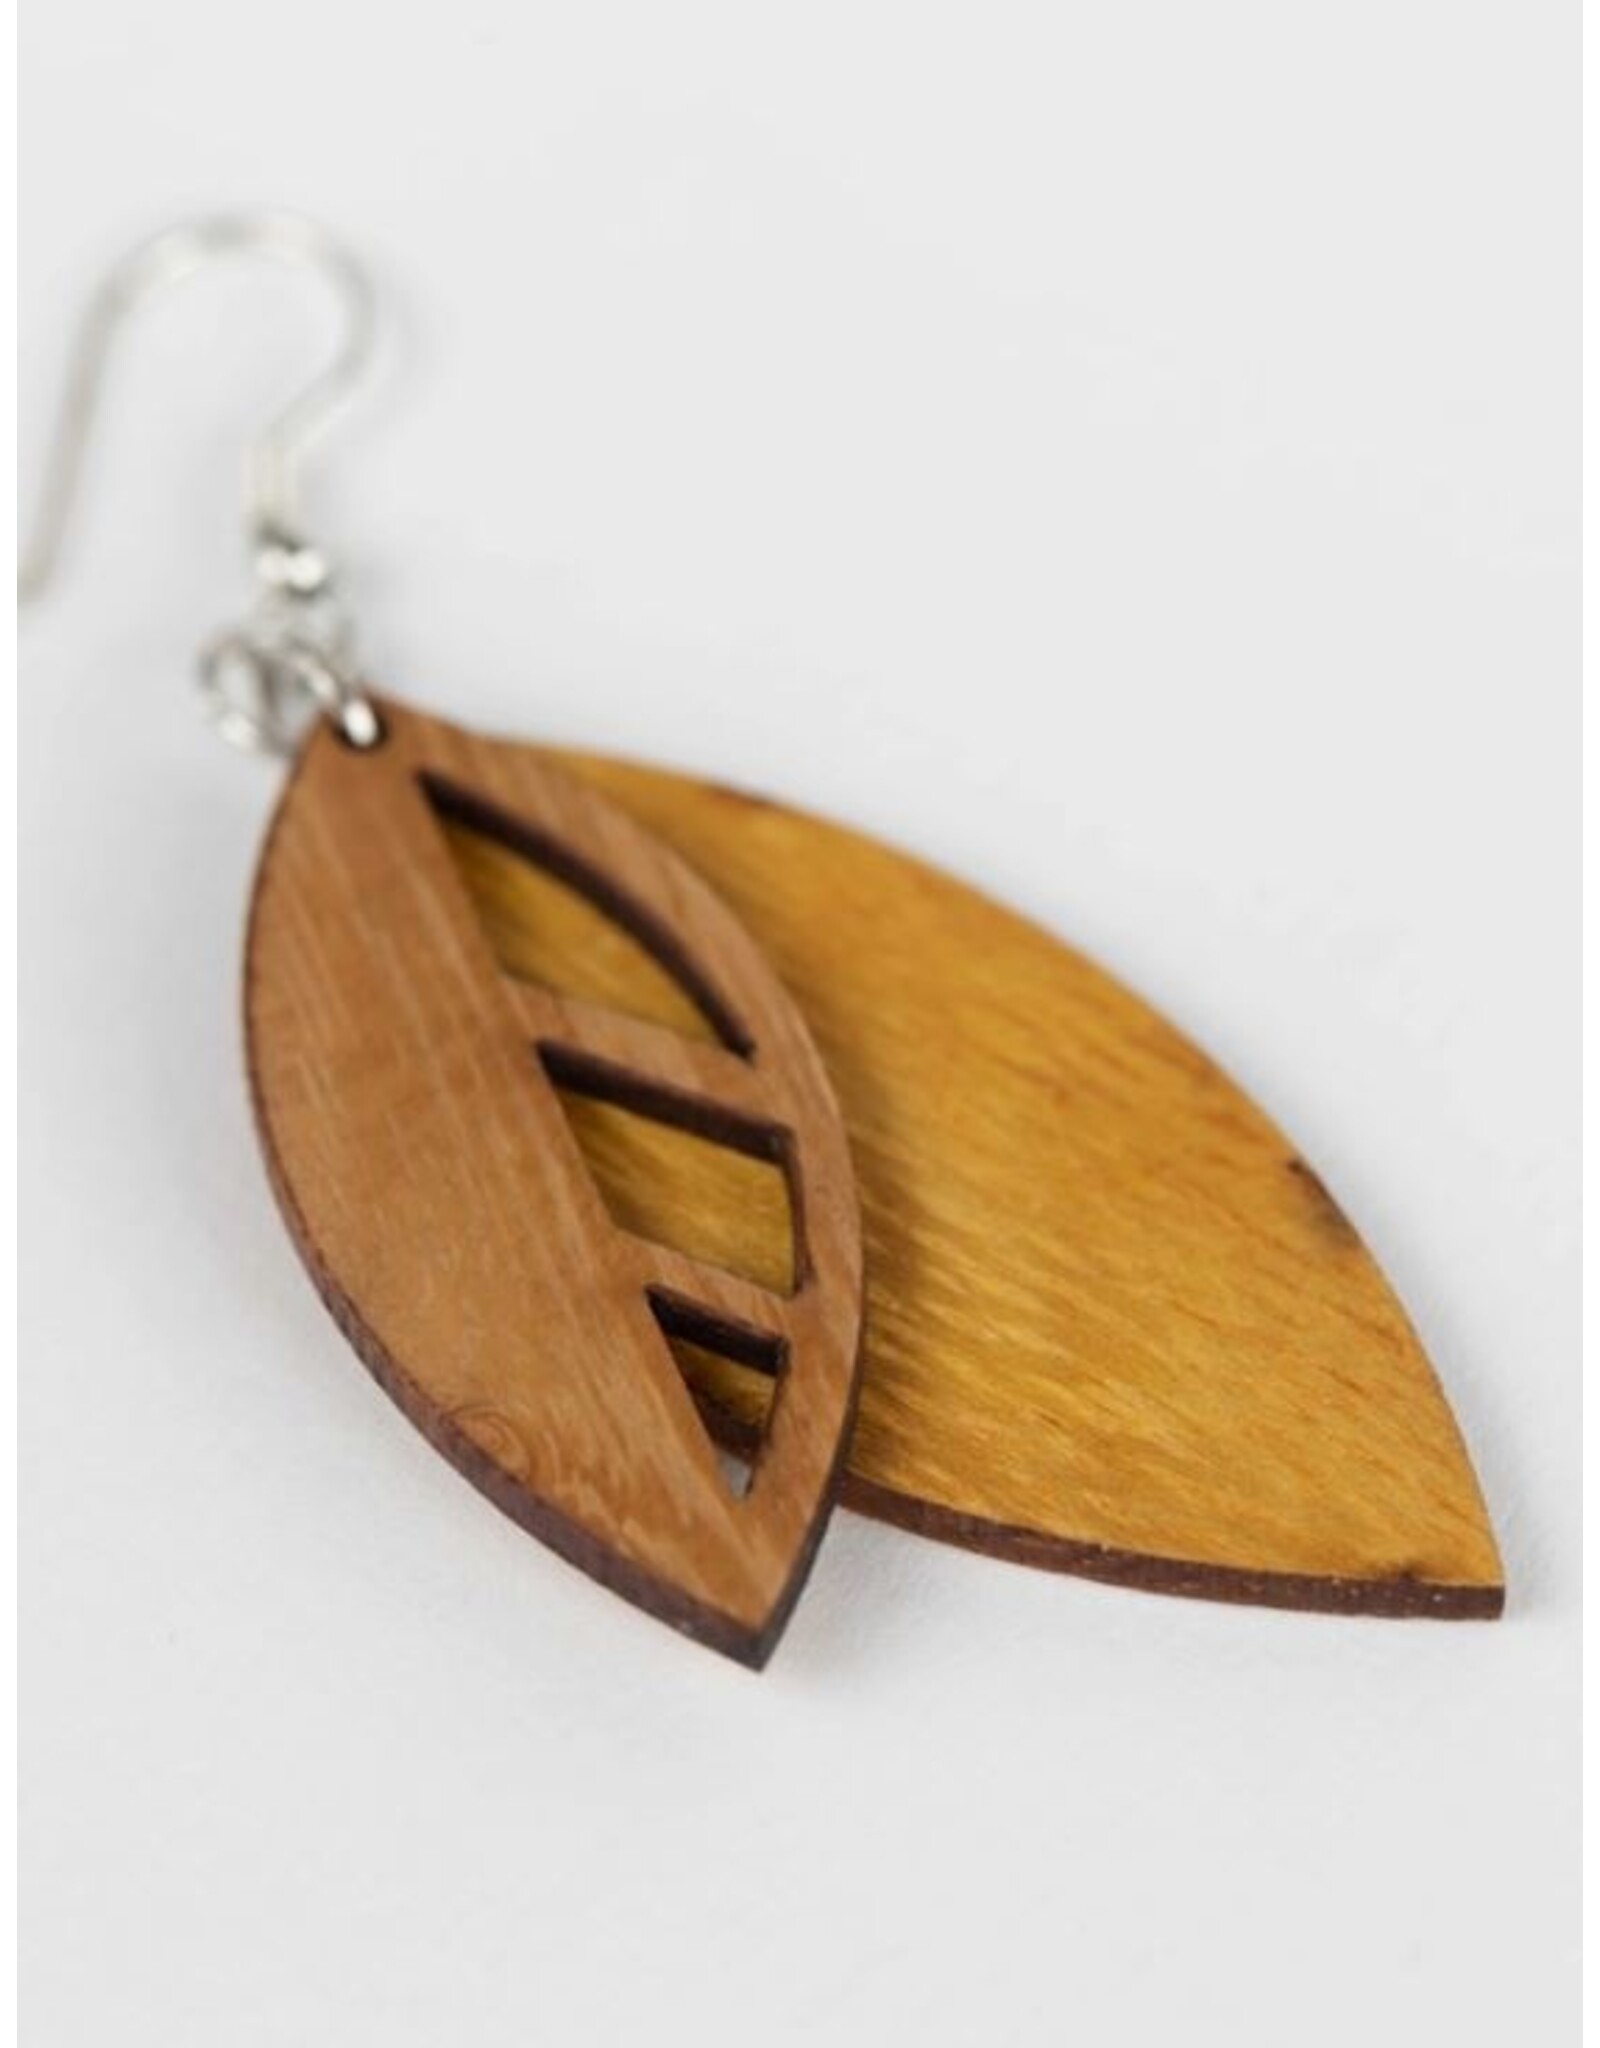 Philippines Falling Leaves Wood Earrings, Philippines